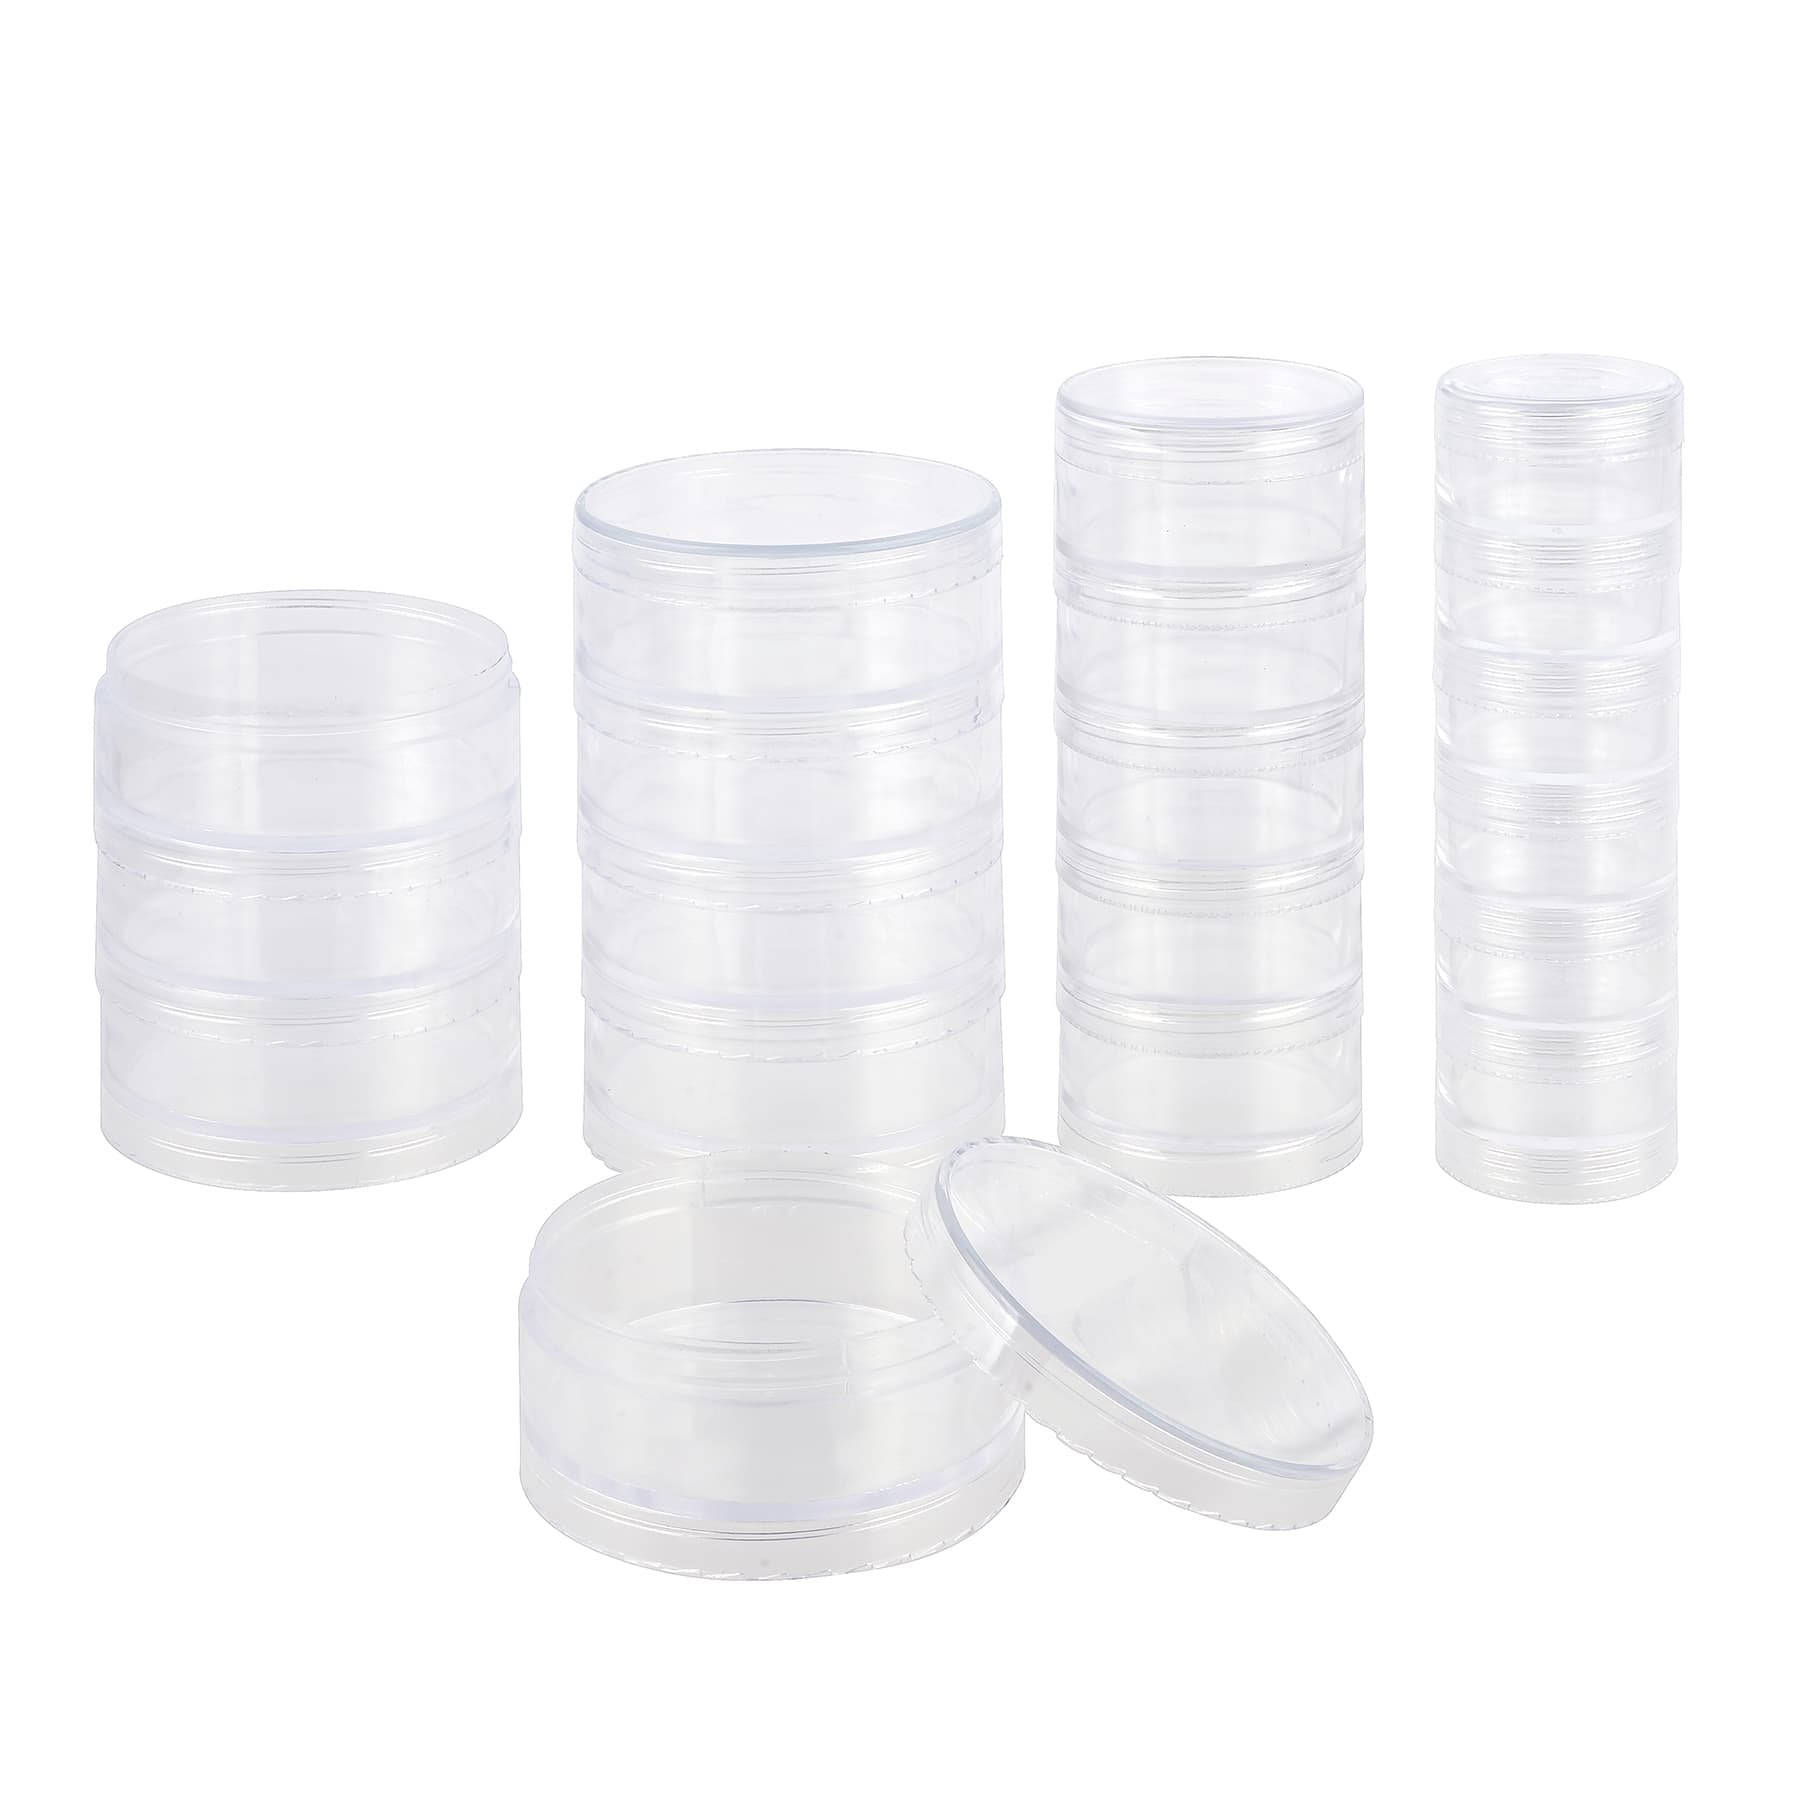 Cosywell 15 Pieces Small Bead Organizer Plastic Bead Storage Containers Clear Craft Storage Organizer Box for Beads Jewelry and Small Items(1 Pack)